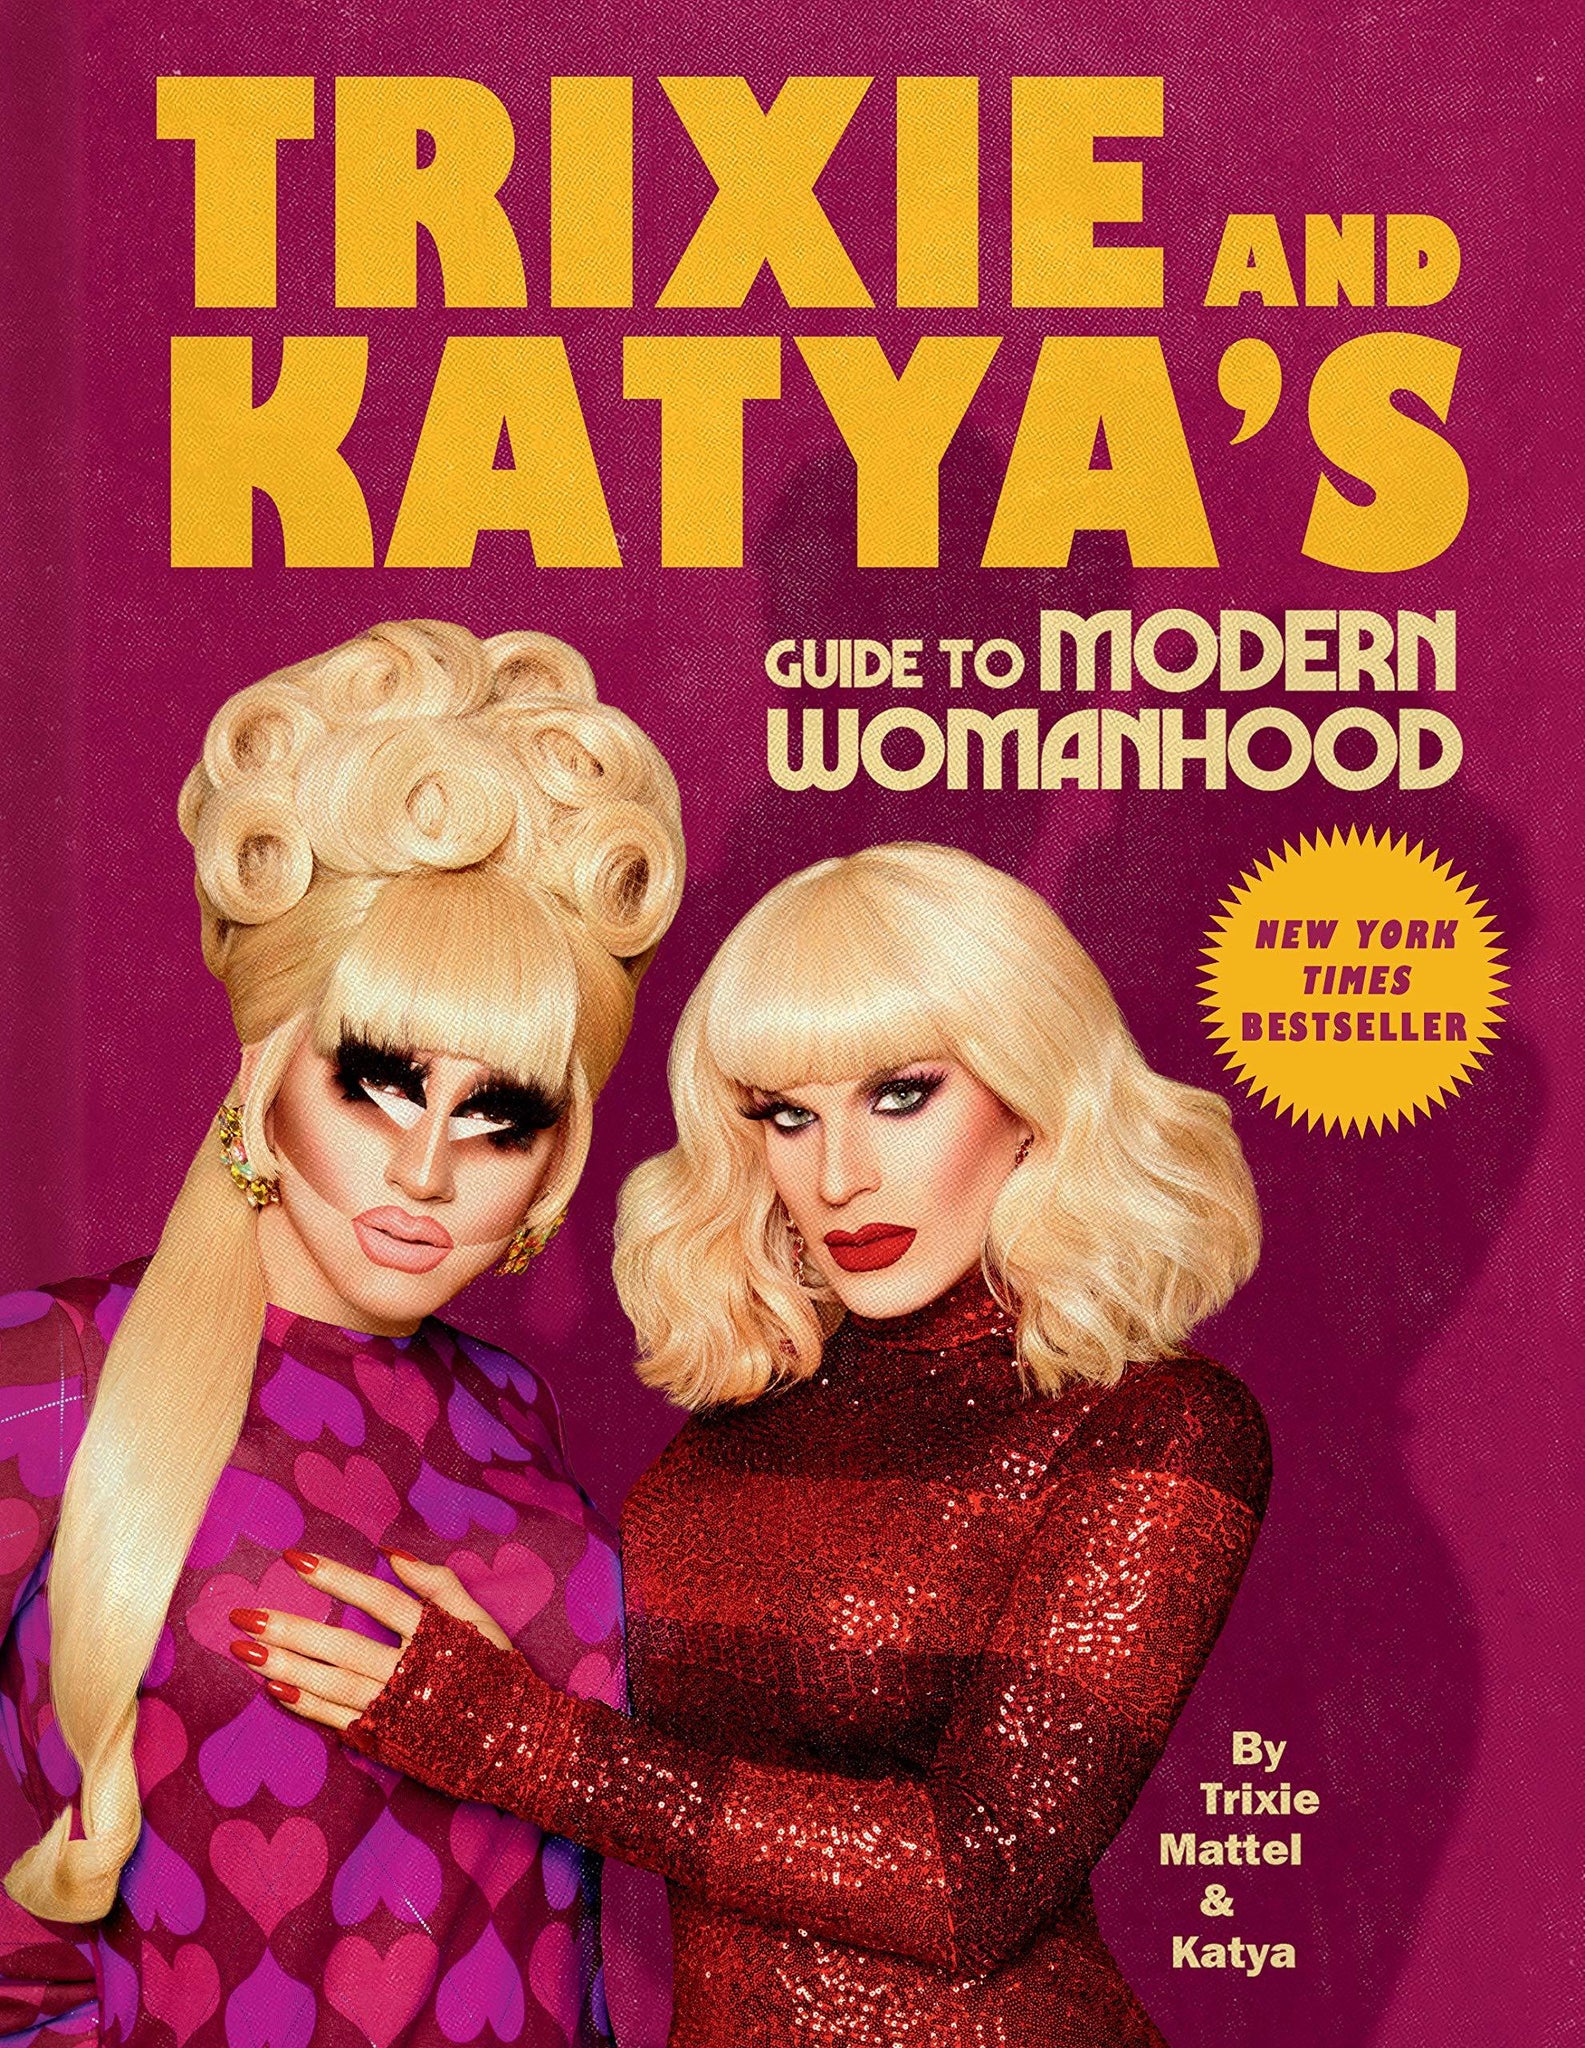 Trixie and Katya's Guide to Modern Womanhood - ShopQueer.co